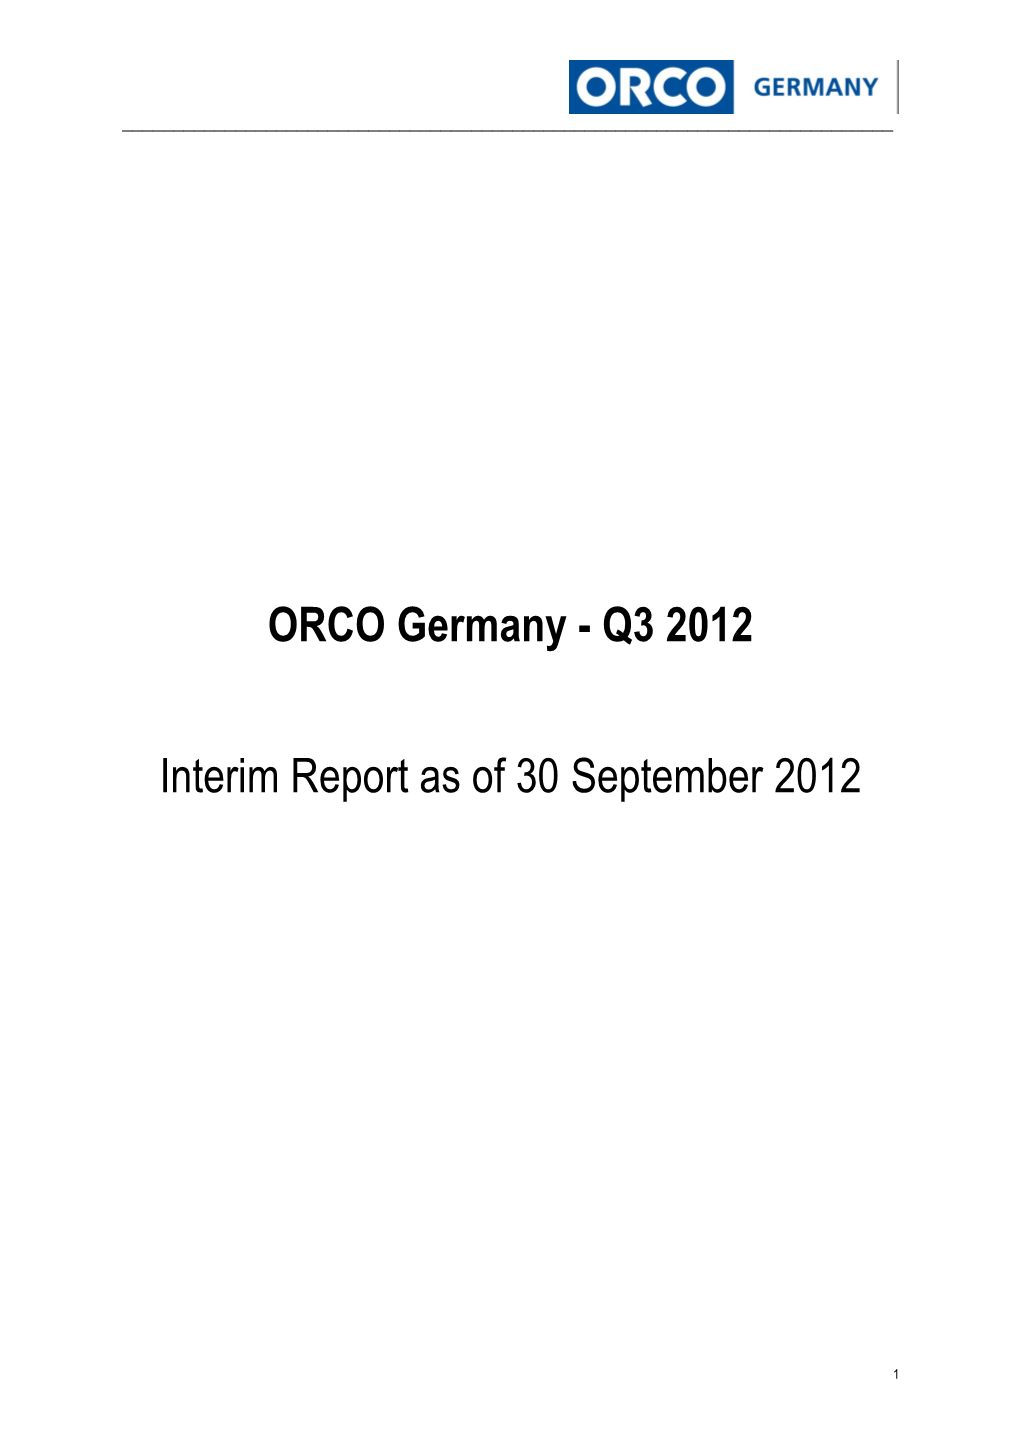 ORCO Germany - Q3 2012